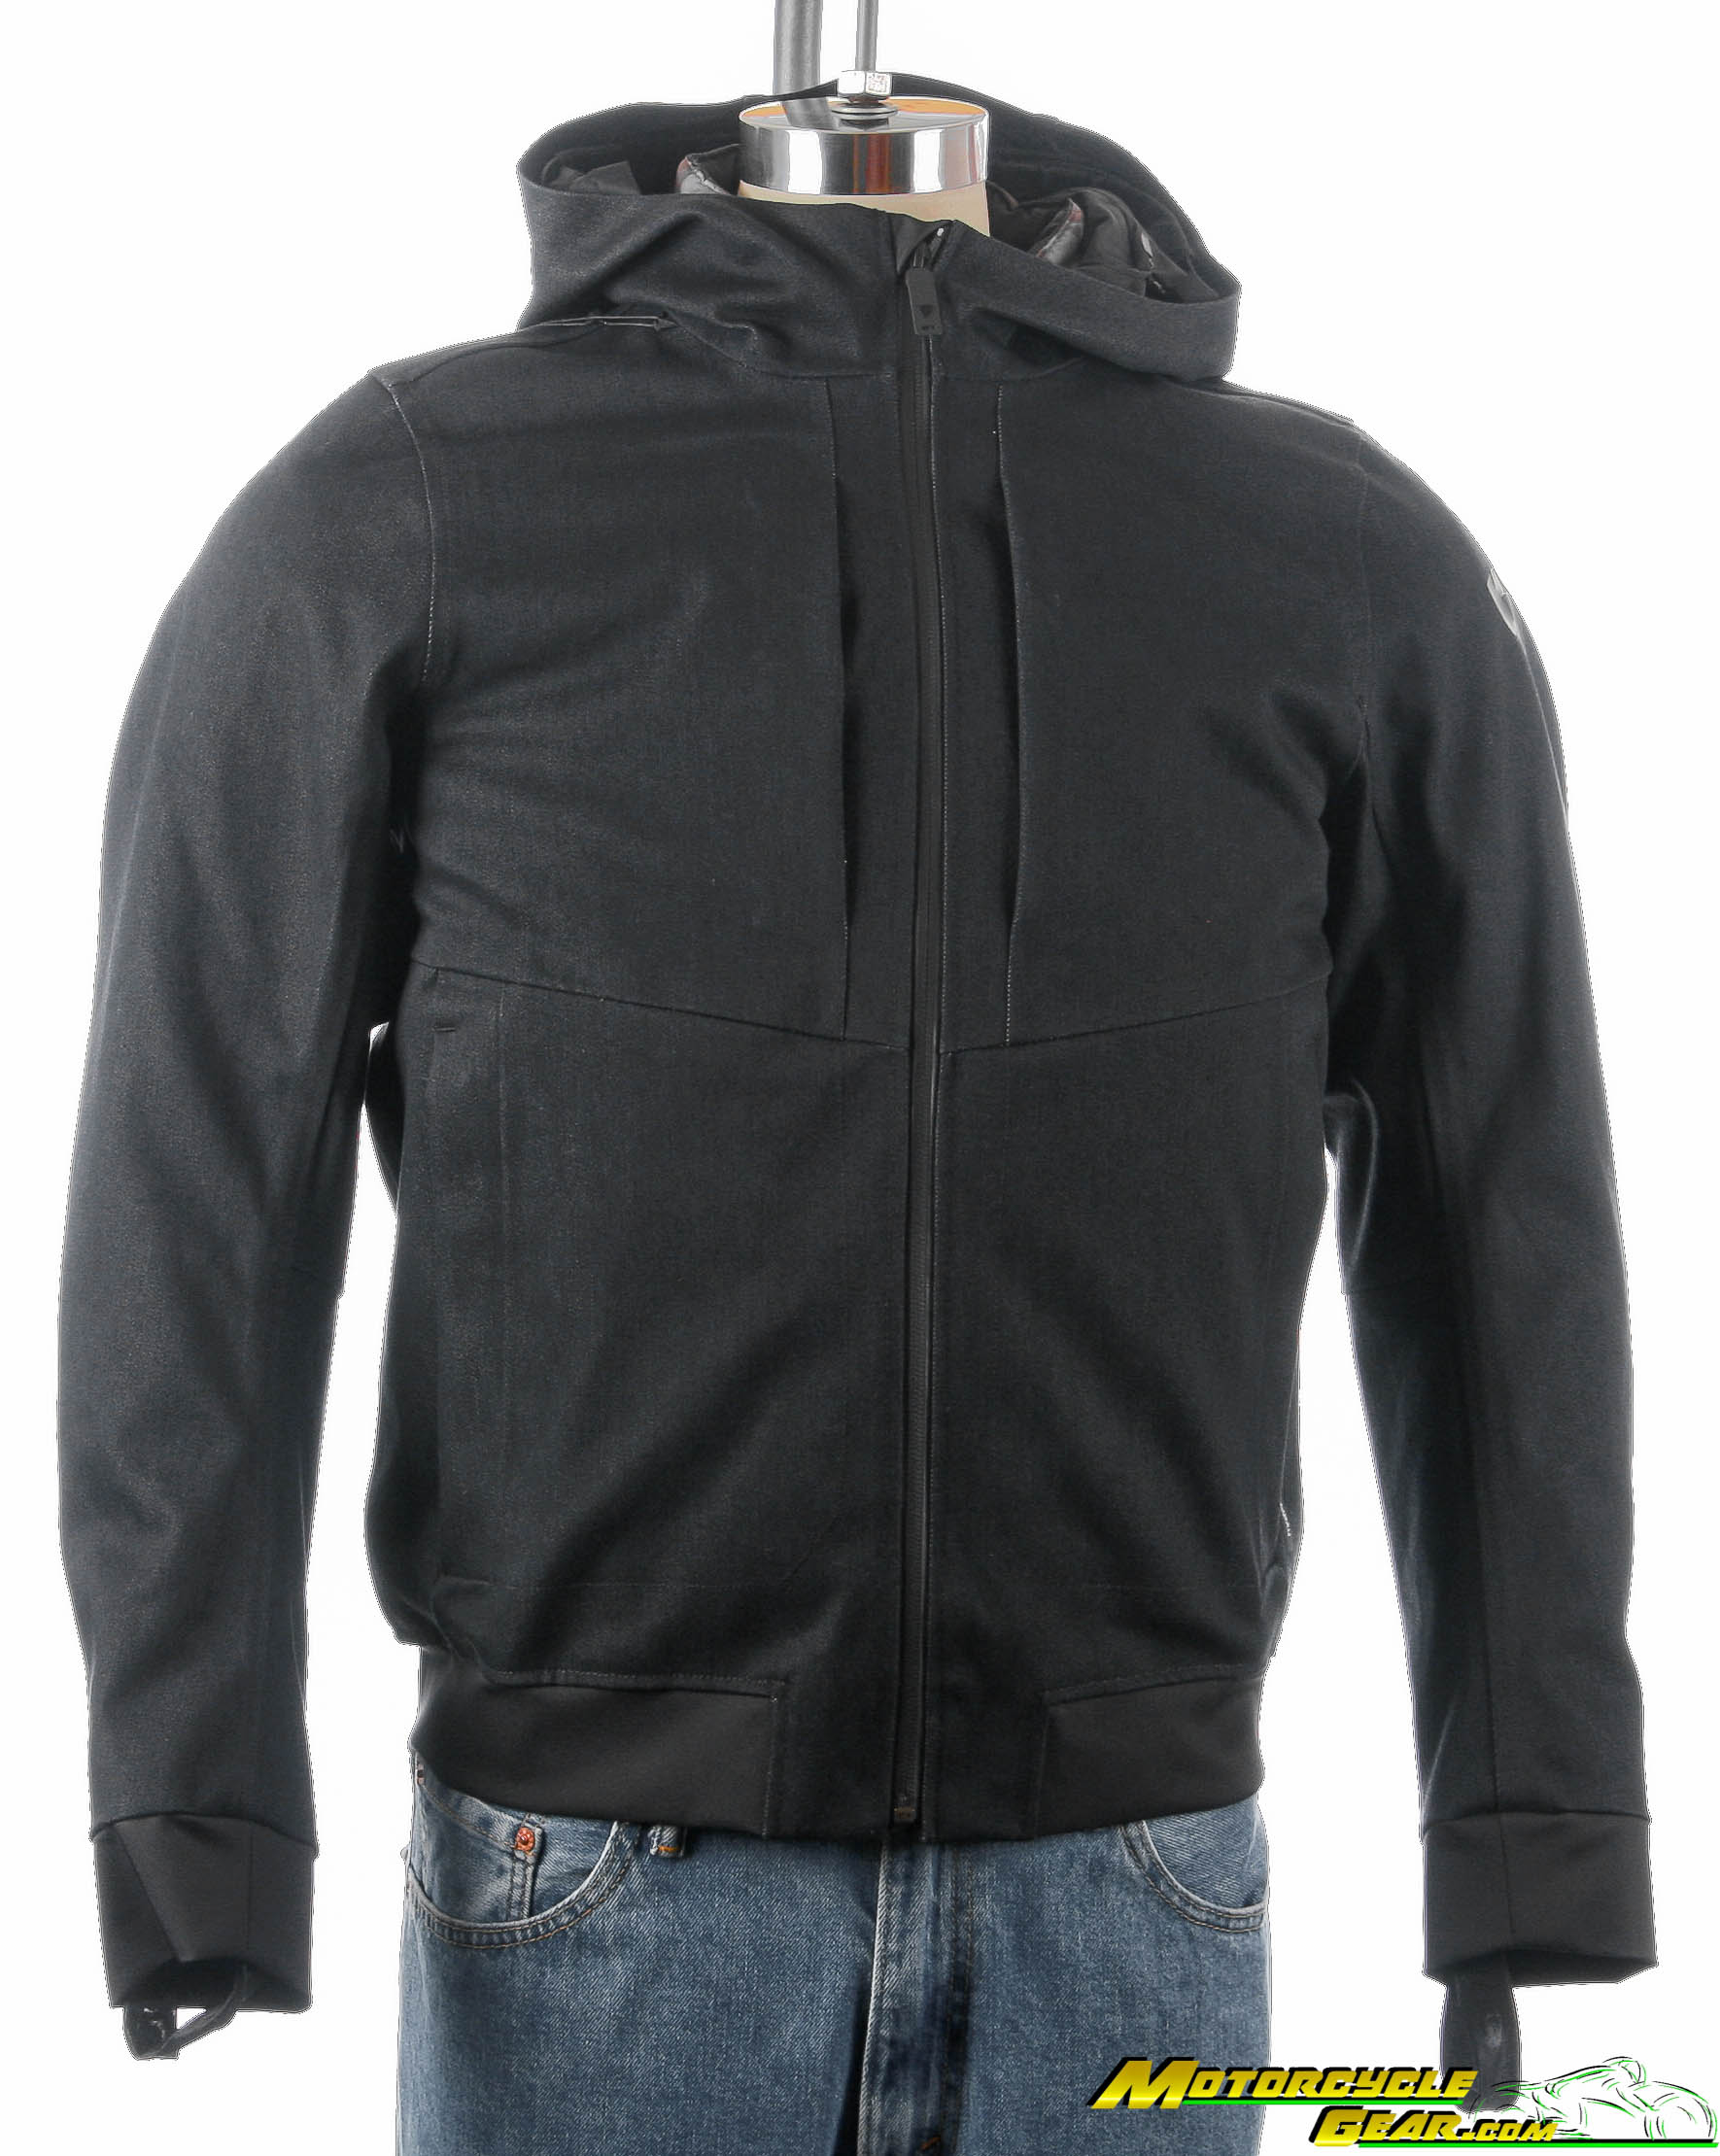 Viewing Images For REV'IT! Stealth 2 Hoody :: MotorcycleGear.com